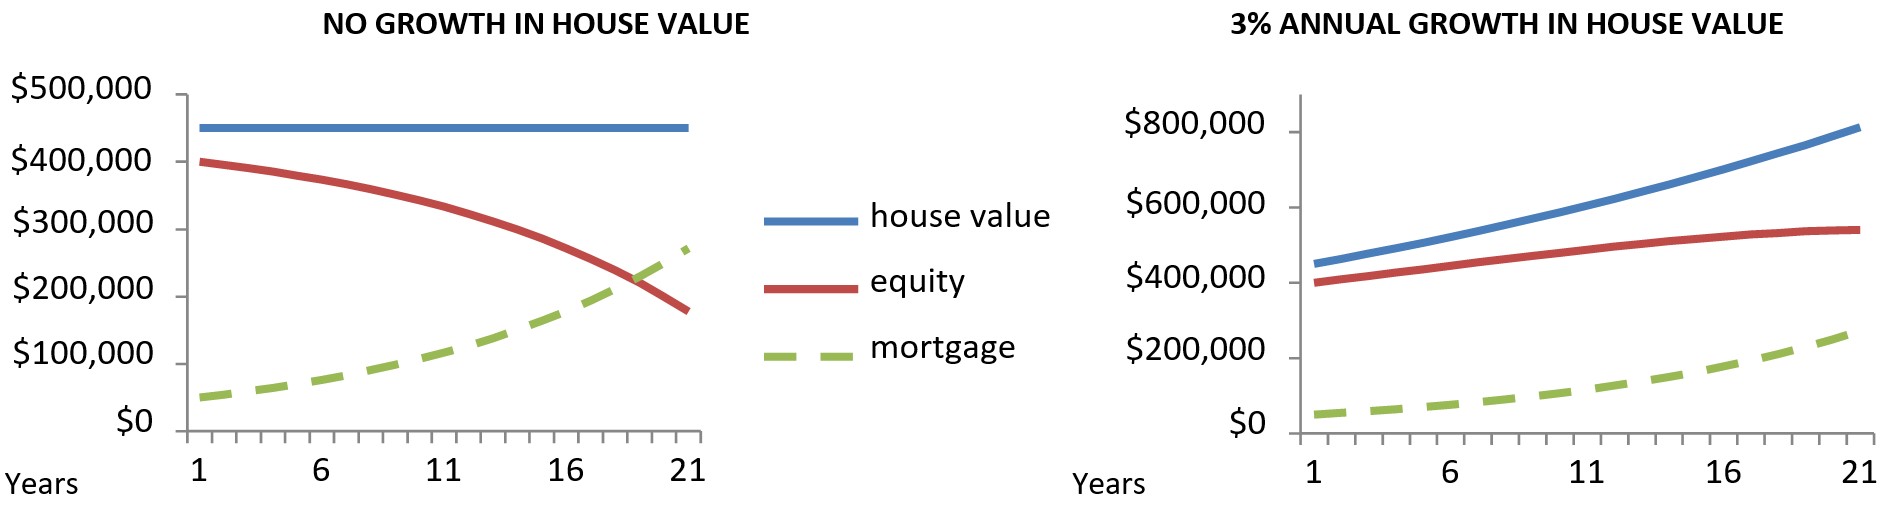 Graph 1 is a line graph showing no growth in house value over a period of 20 years. The mortgage value increases over this period and the equity value decreases. Graph 2 is a line graph showing 3% annual growth in house value over a period of 20 years. Both the mortgage value and equity value increase over this period.